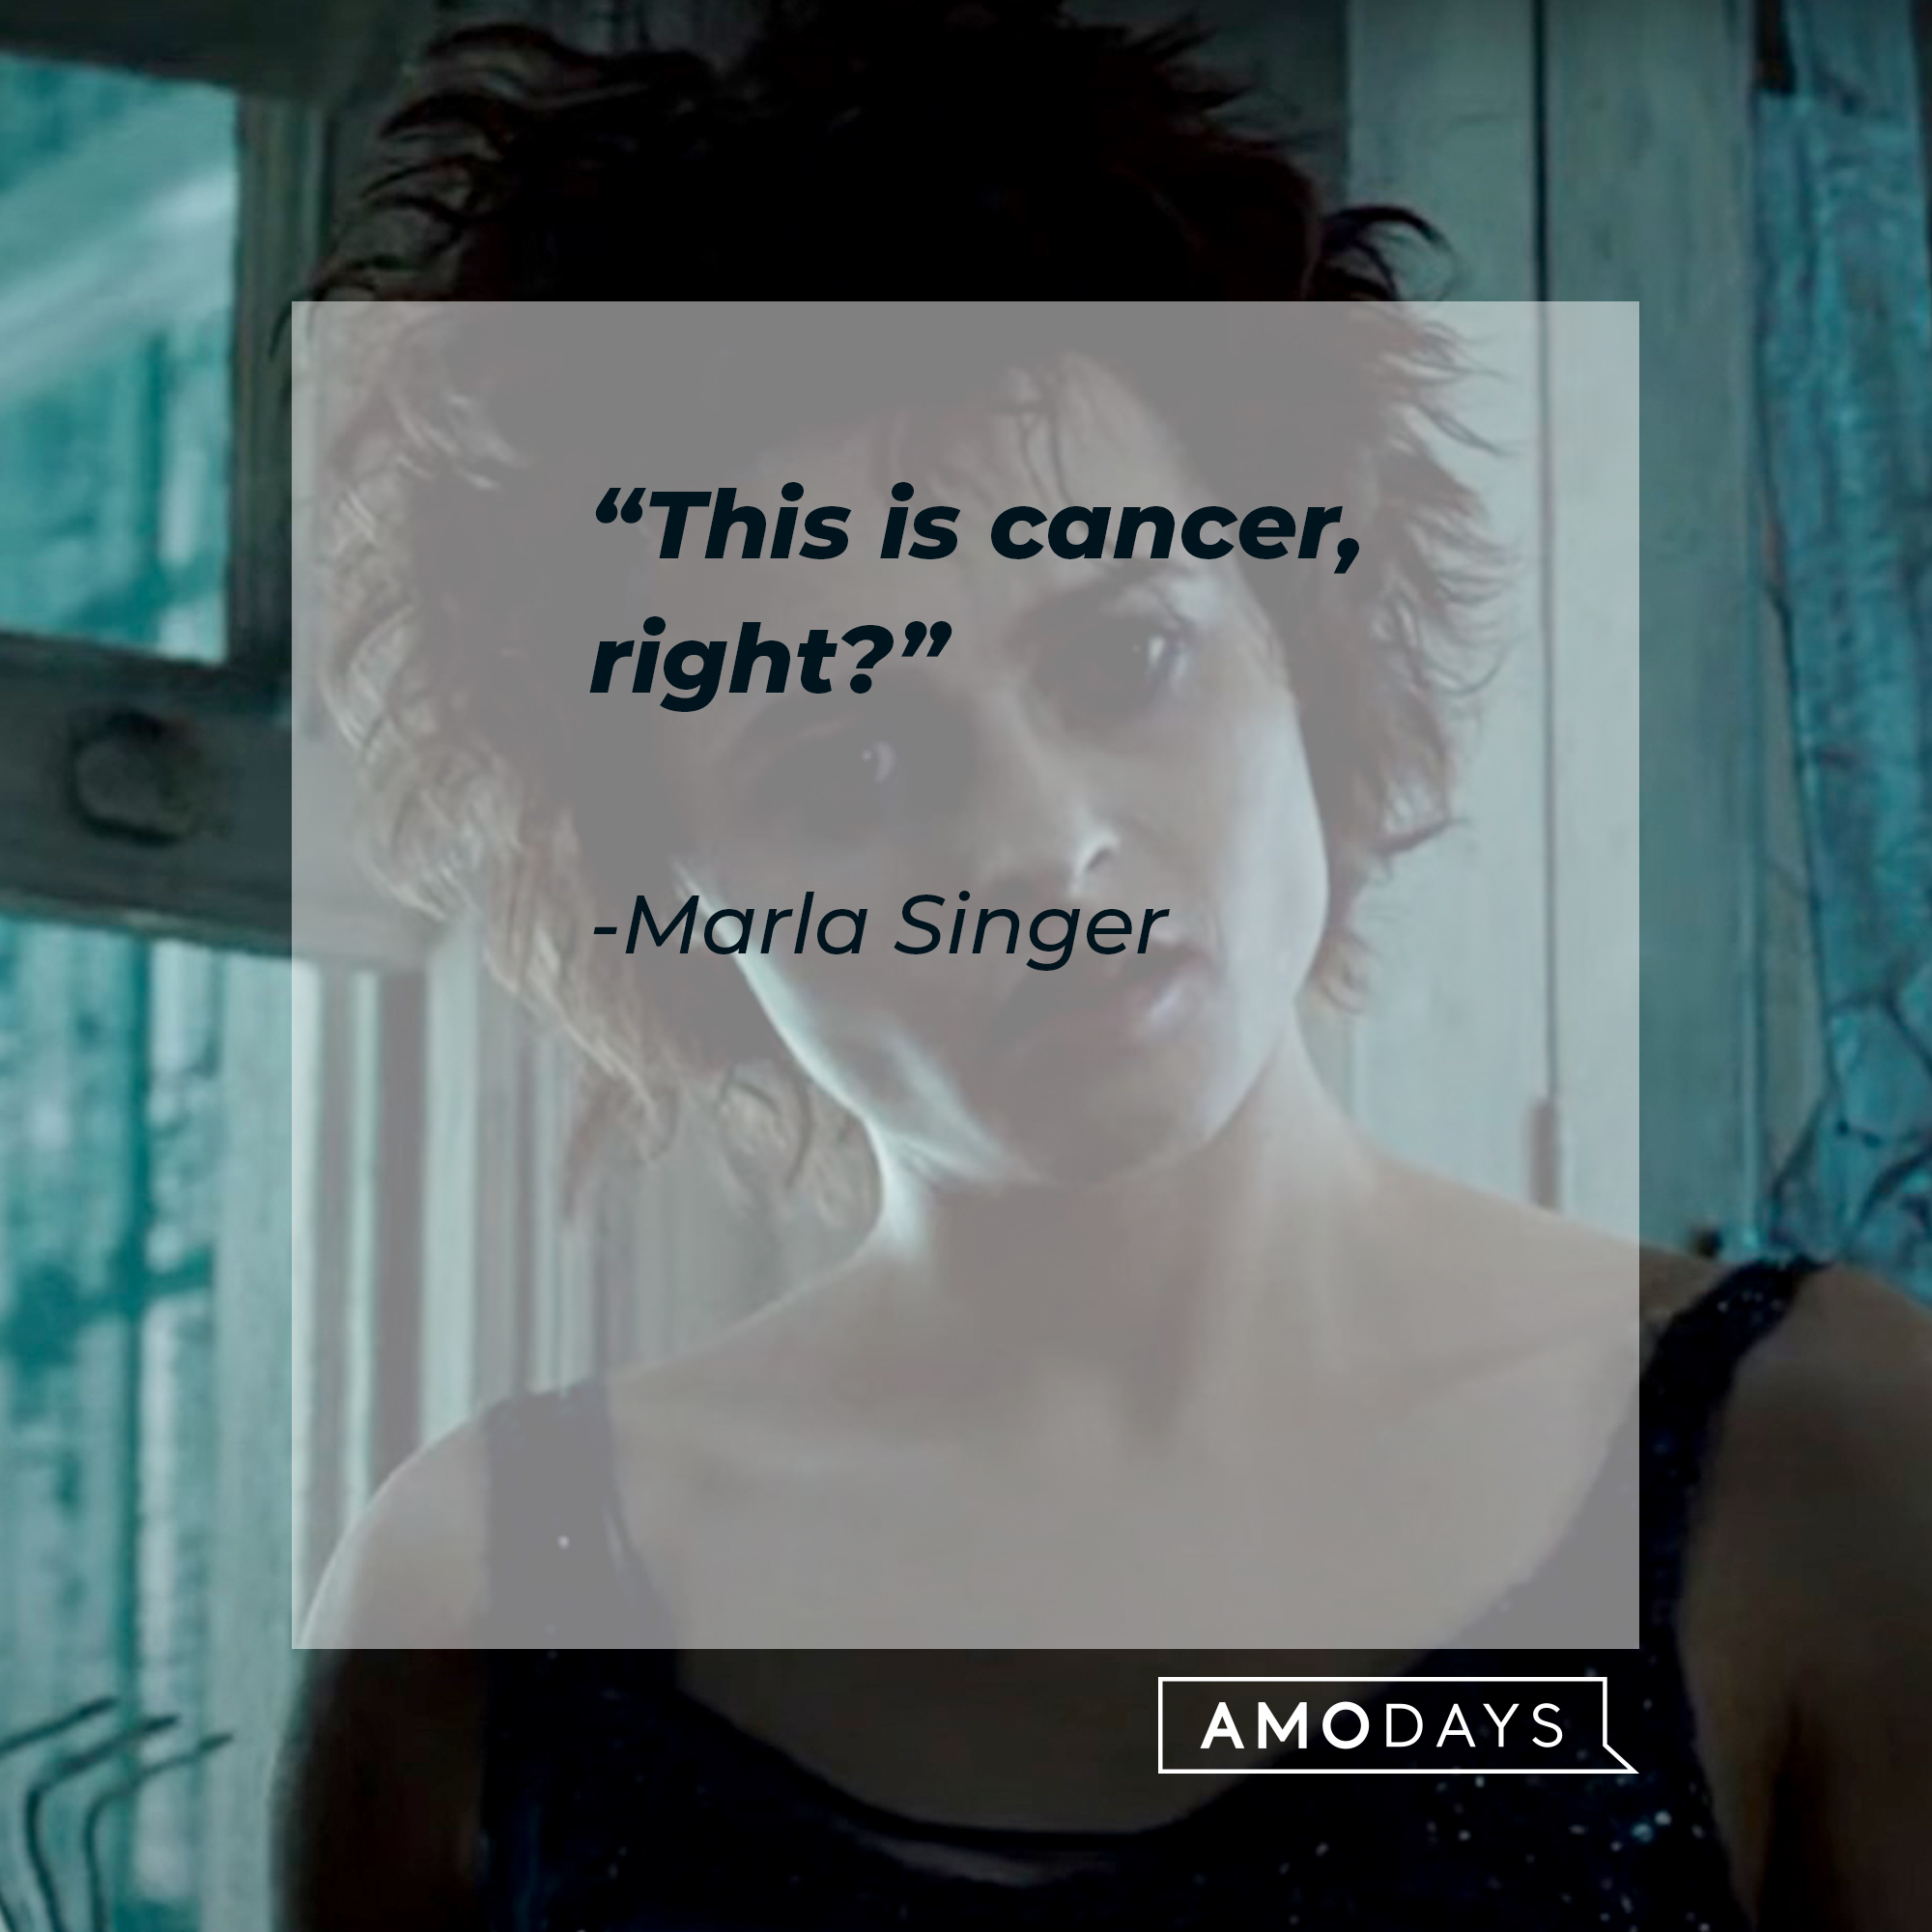 An image of Marla Singer with her quote:“This is cancer, right? ”| Image: facebook.com/FightClub